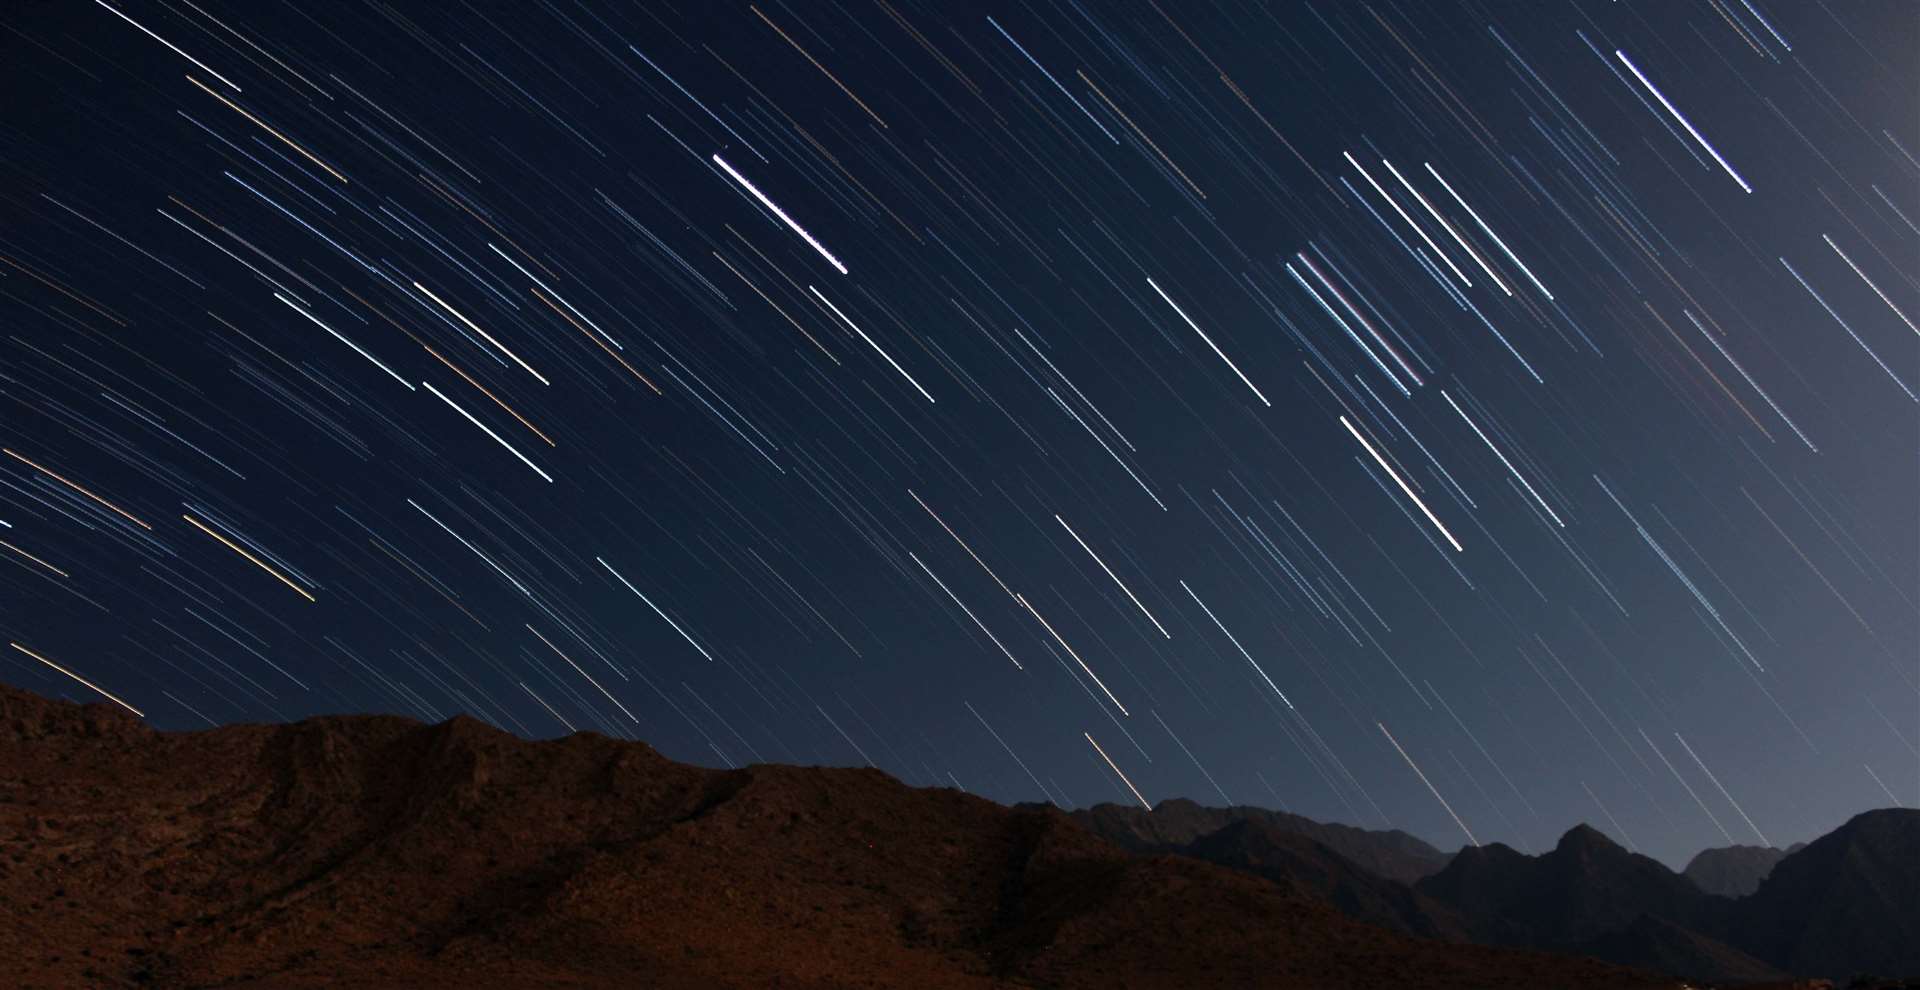 The Lyrid meteor shower is going to peak over the next few nights